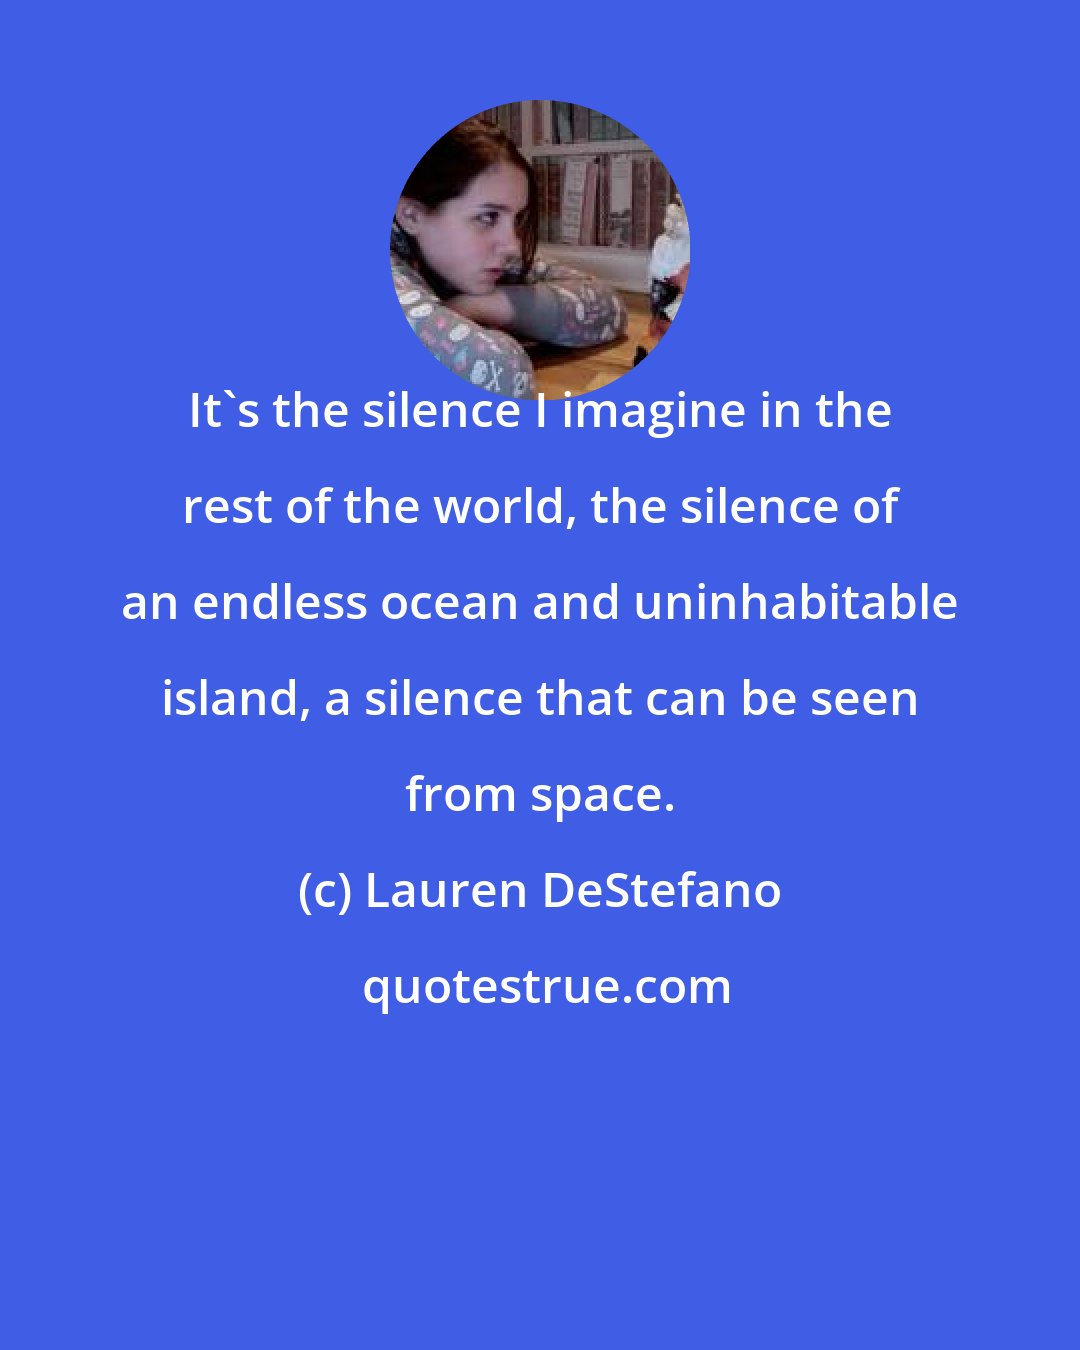 Lauren DeStefano: It's the silence I imagine in the rest of the world, the silence of an endless ocean and uninhabitable island, a silence that can be seen from space.